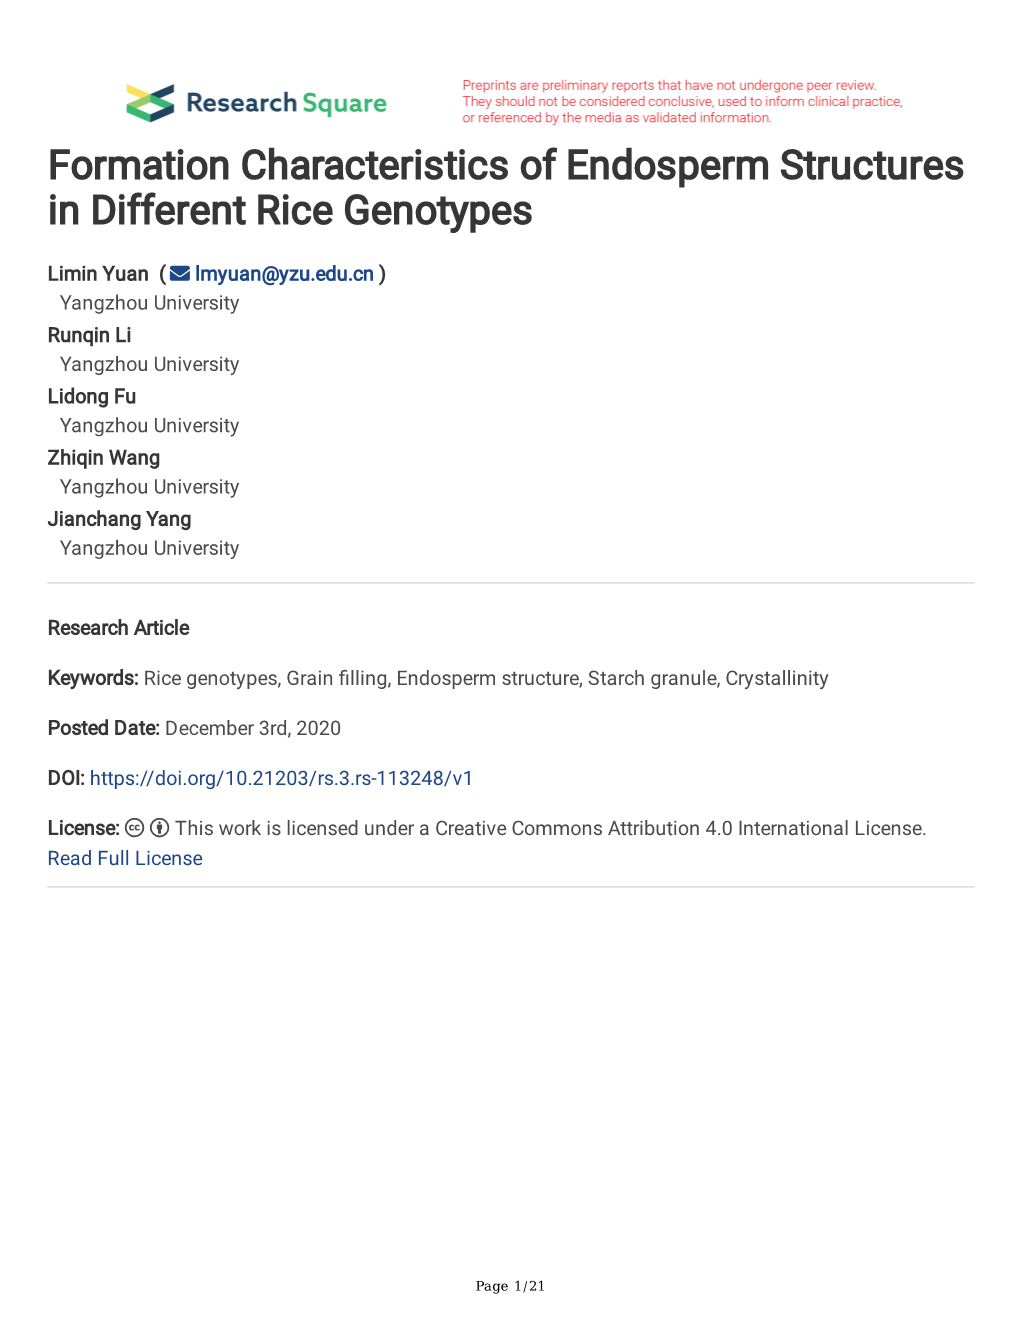 Formation Characteristics of Endosperm Structures in Different Rice Genotypes